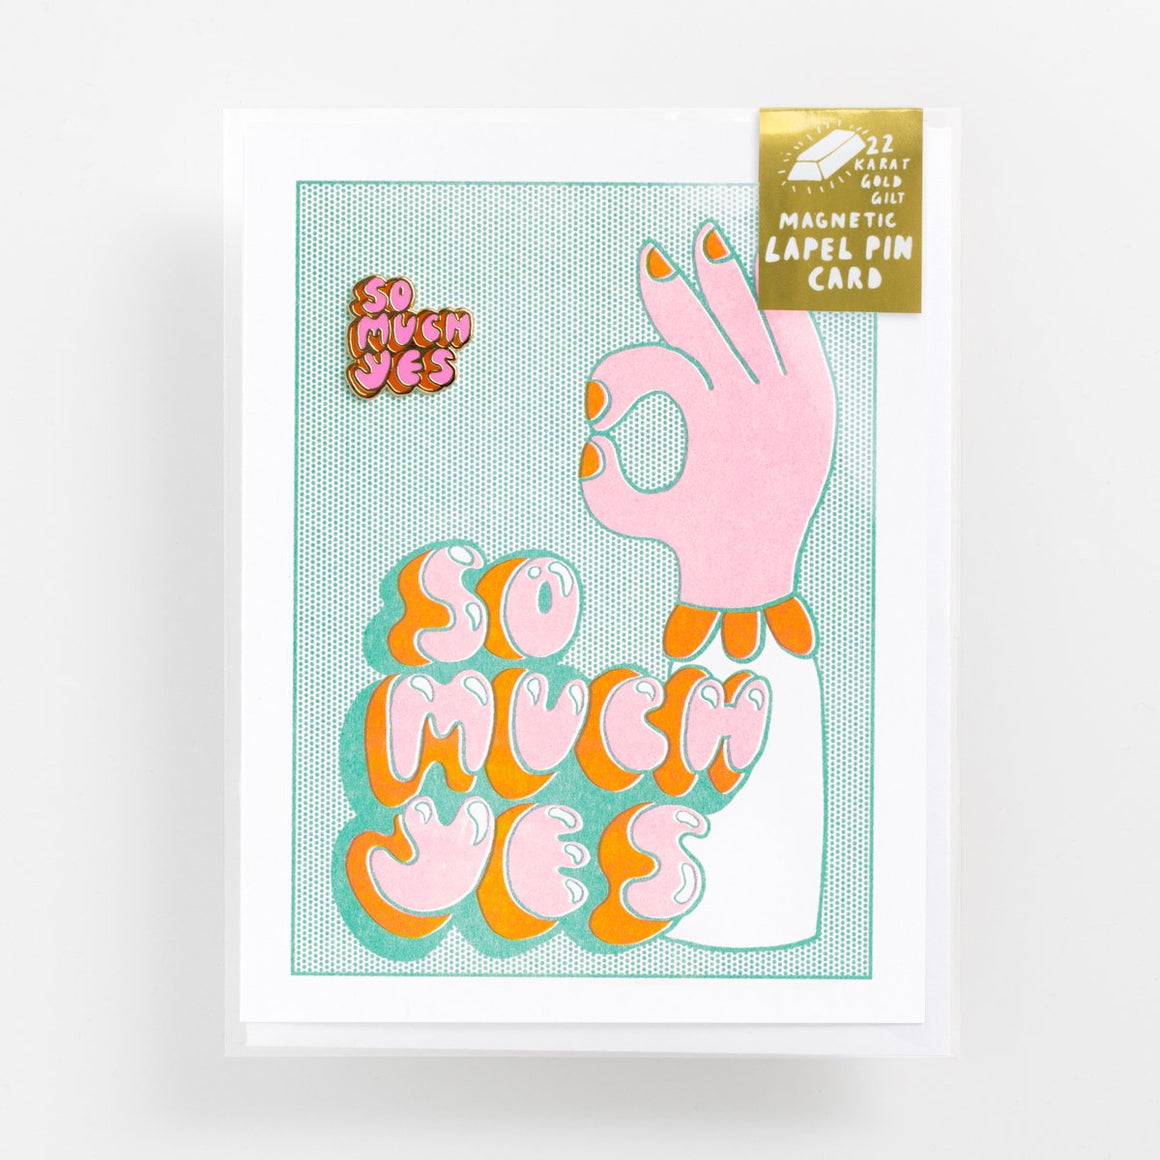 Lapel Pin + Card | So Much Yes